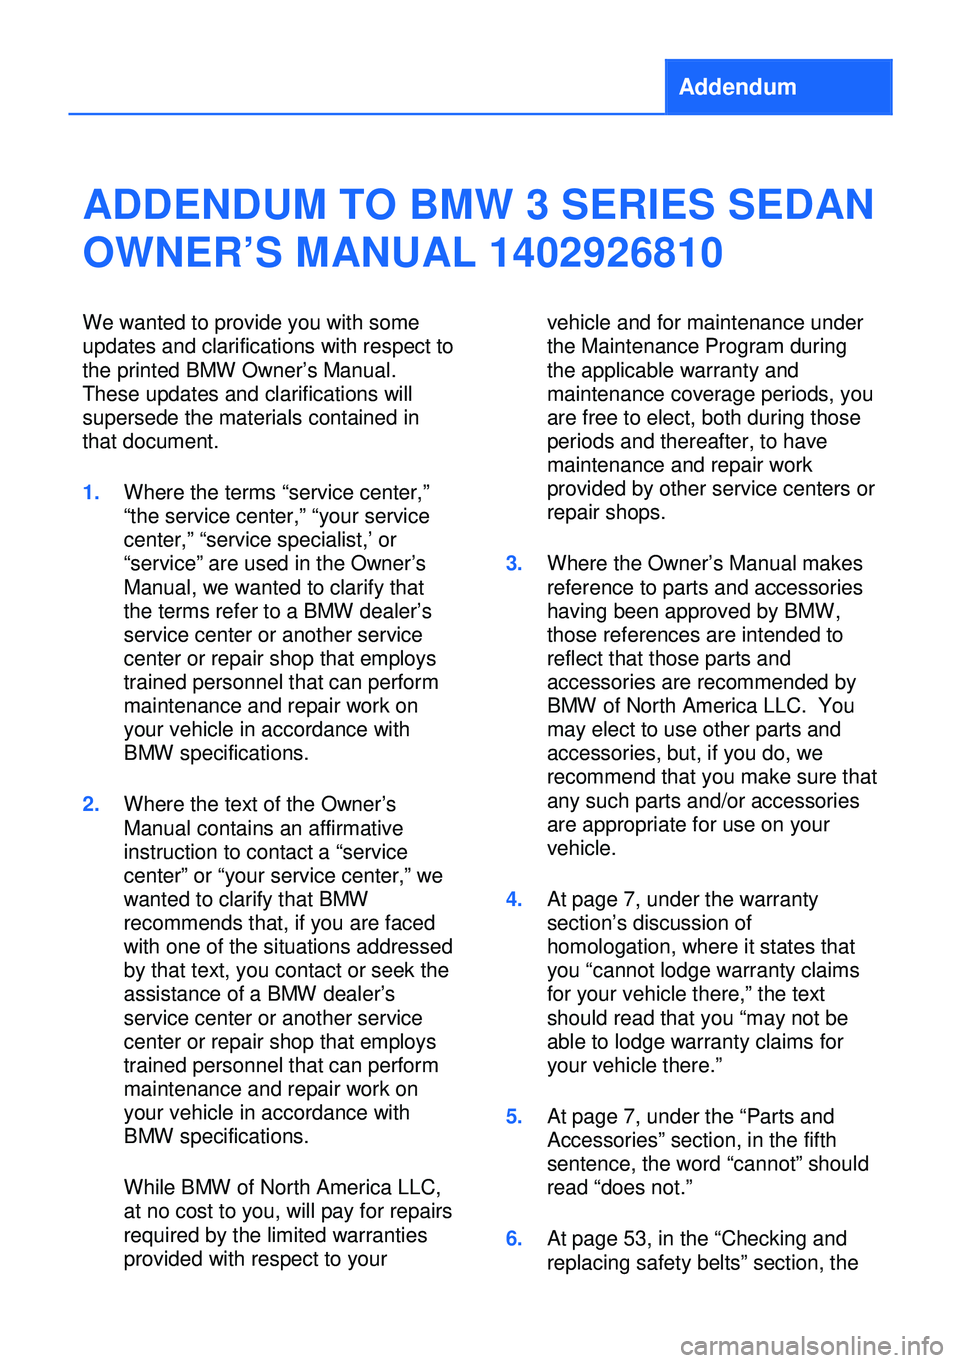 BMW 320i XDRIVE SEDAN 2013  Owners Manual Addendum
ADDENDUM TO BMW 3 SERIES SEDAN
OWNER’S MANUAL 1402926810
We wanted to provide you with some
updates and clarifications with respect to
the printed BMW Owner’s Manual.
These updates and cl